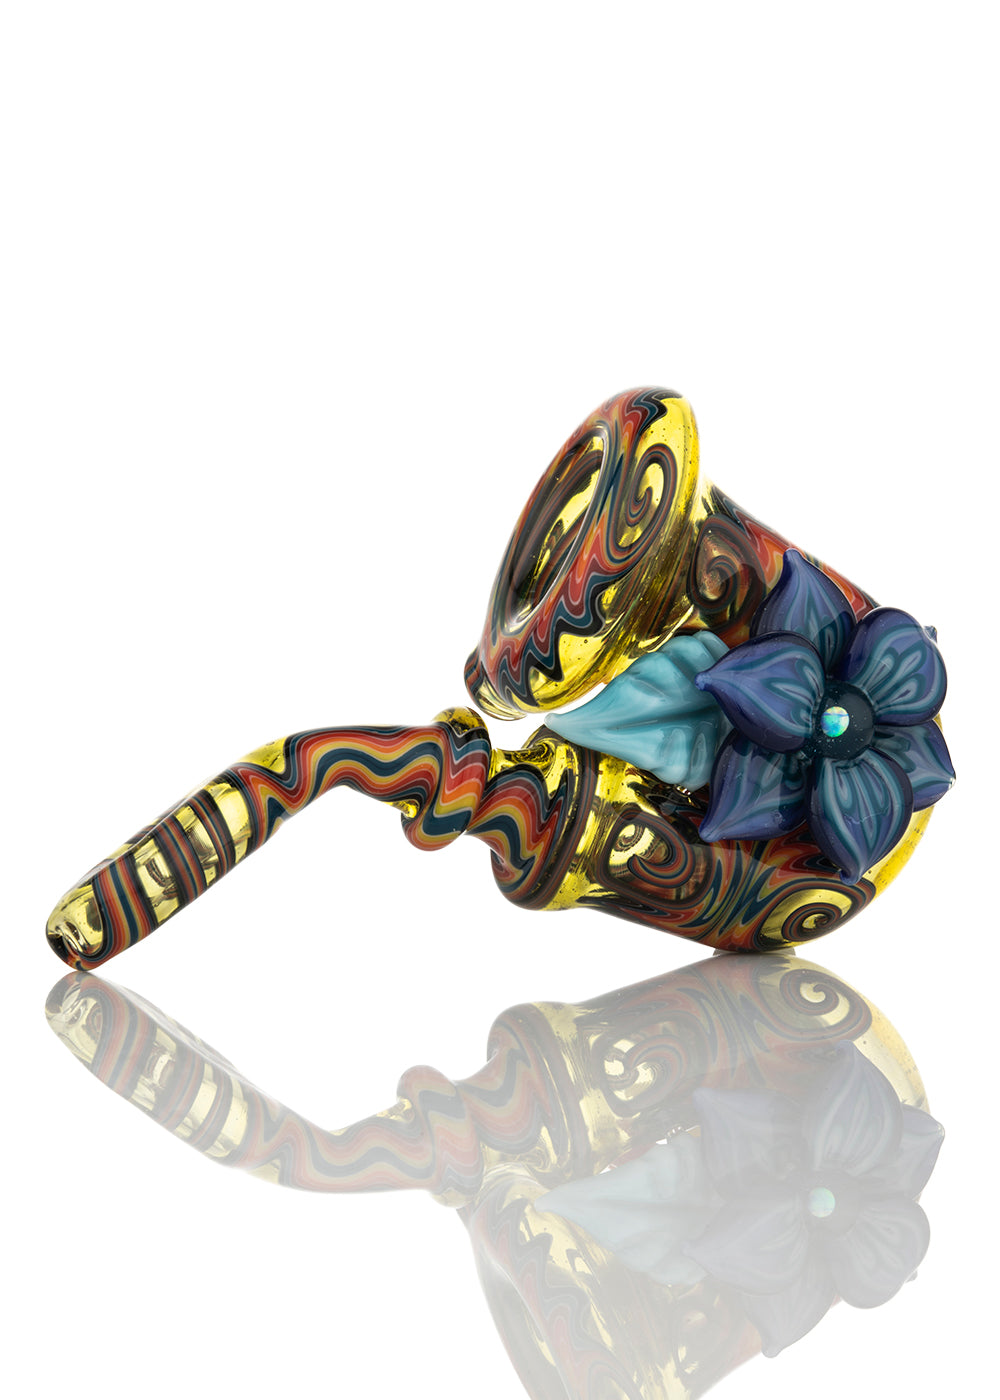 Terps (CFL) Flower Sherlock with Opal Cololaboration by Blossom Glass and DarthSilicate